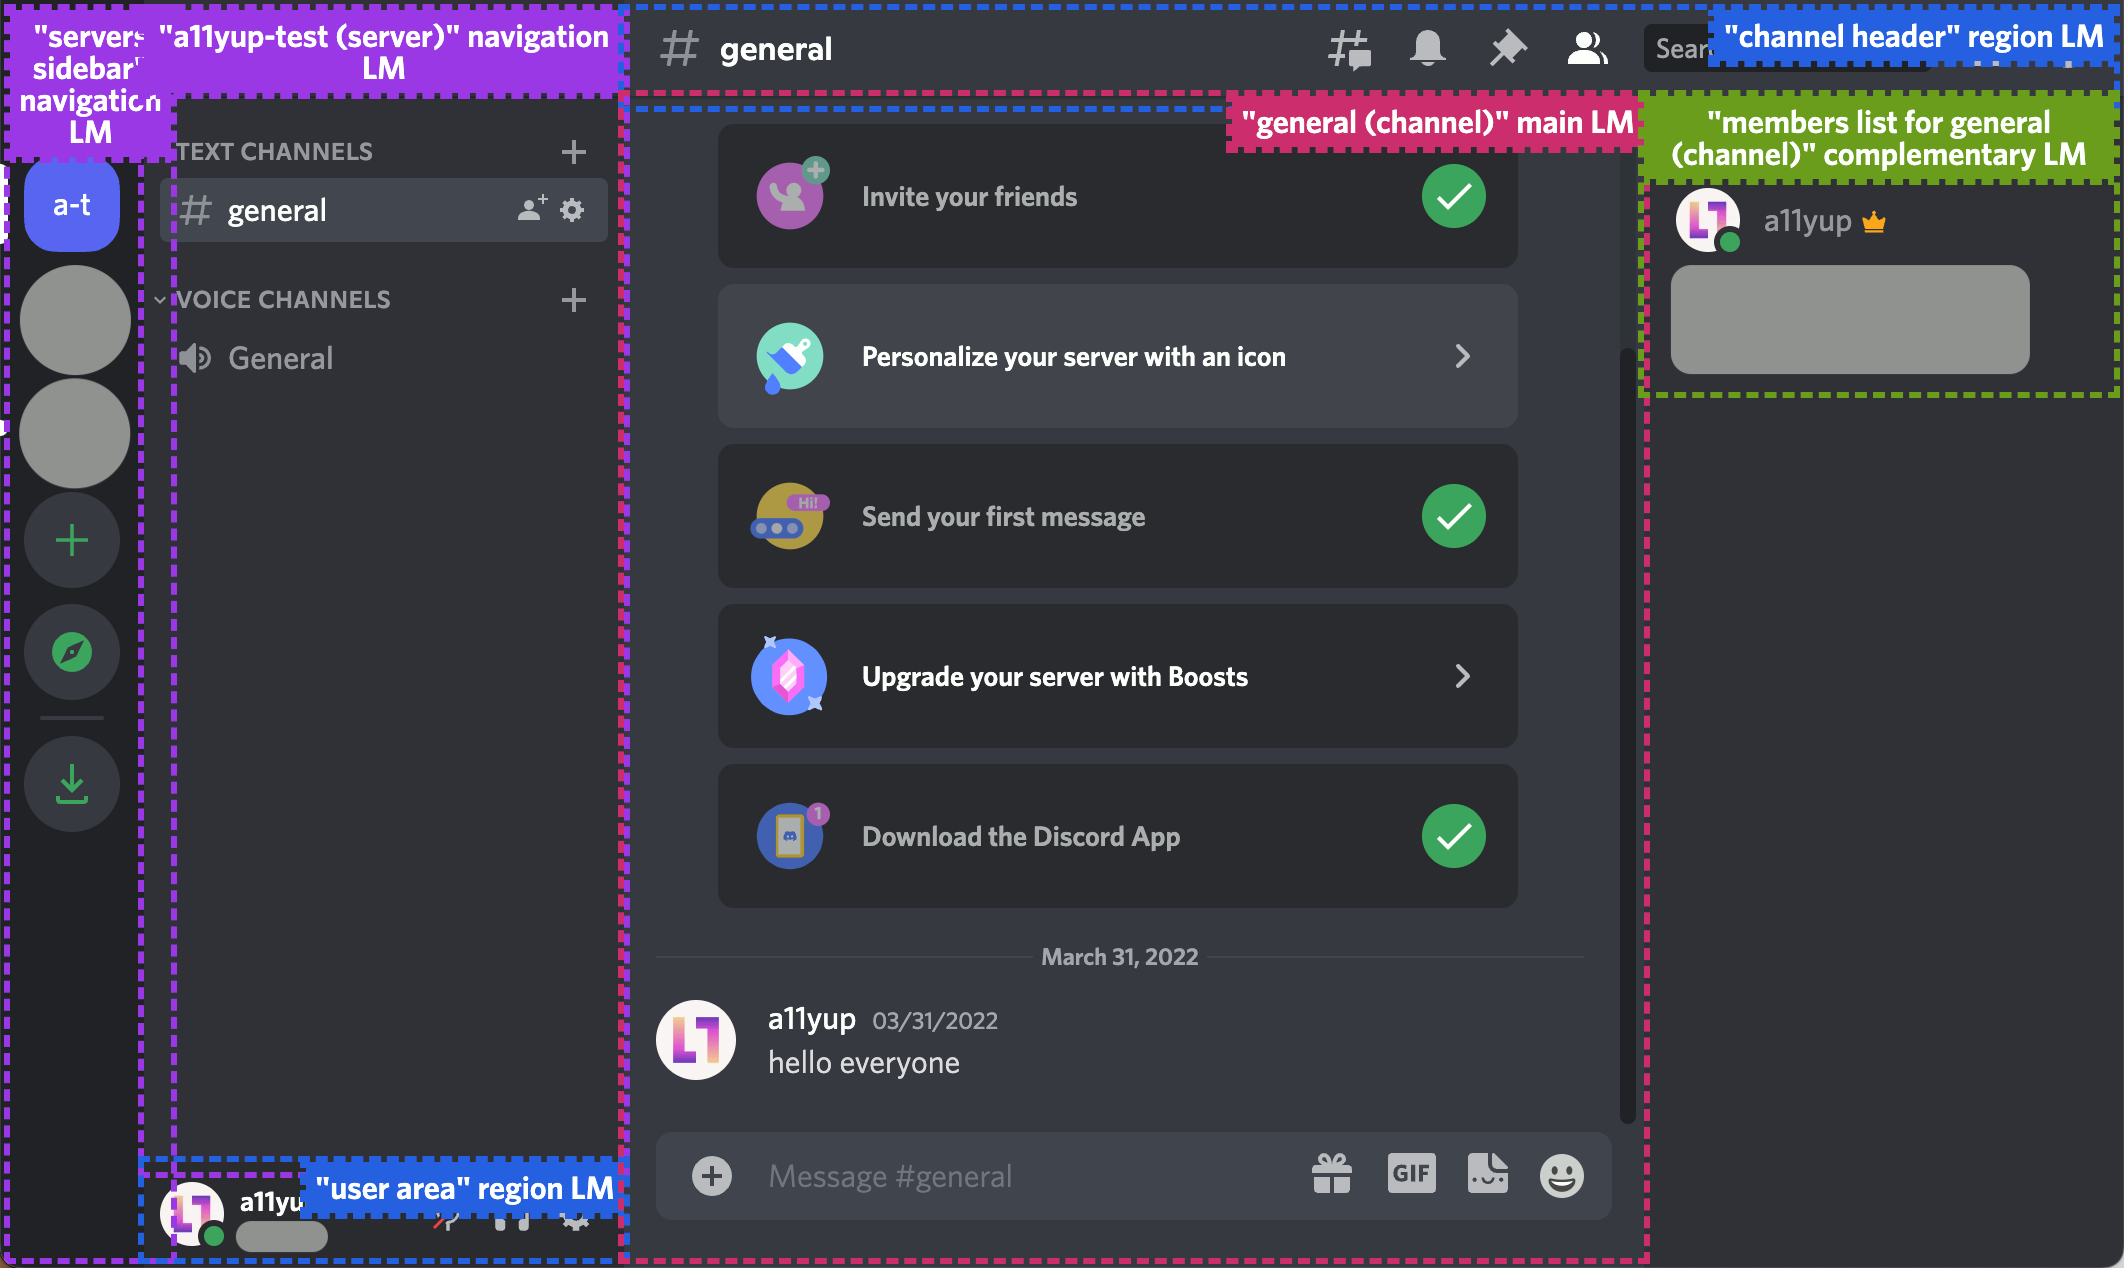 The landmarks in Discord's main layout look very appropriate. There are six different landmarks being used, as described in the paragraph prior to the picture.